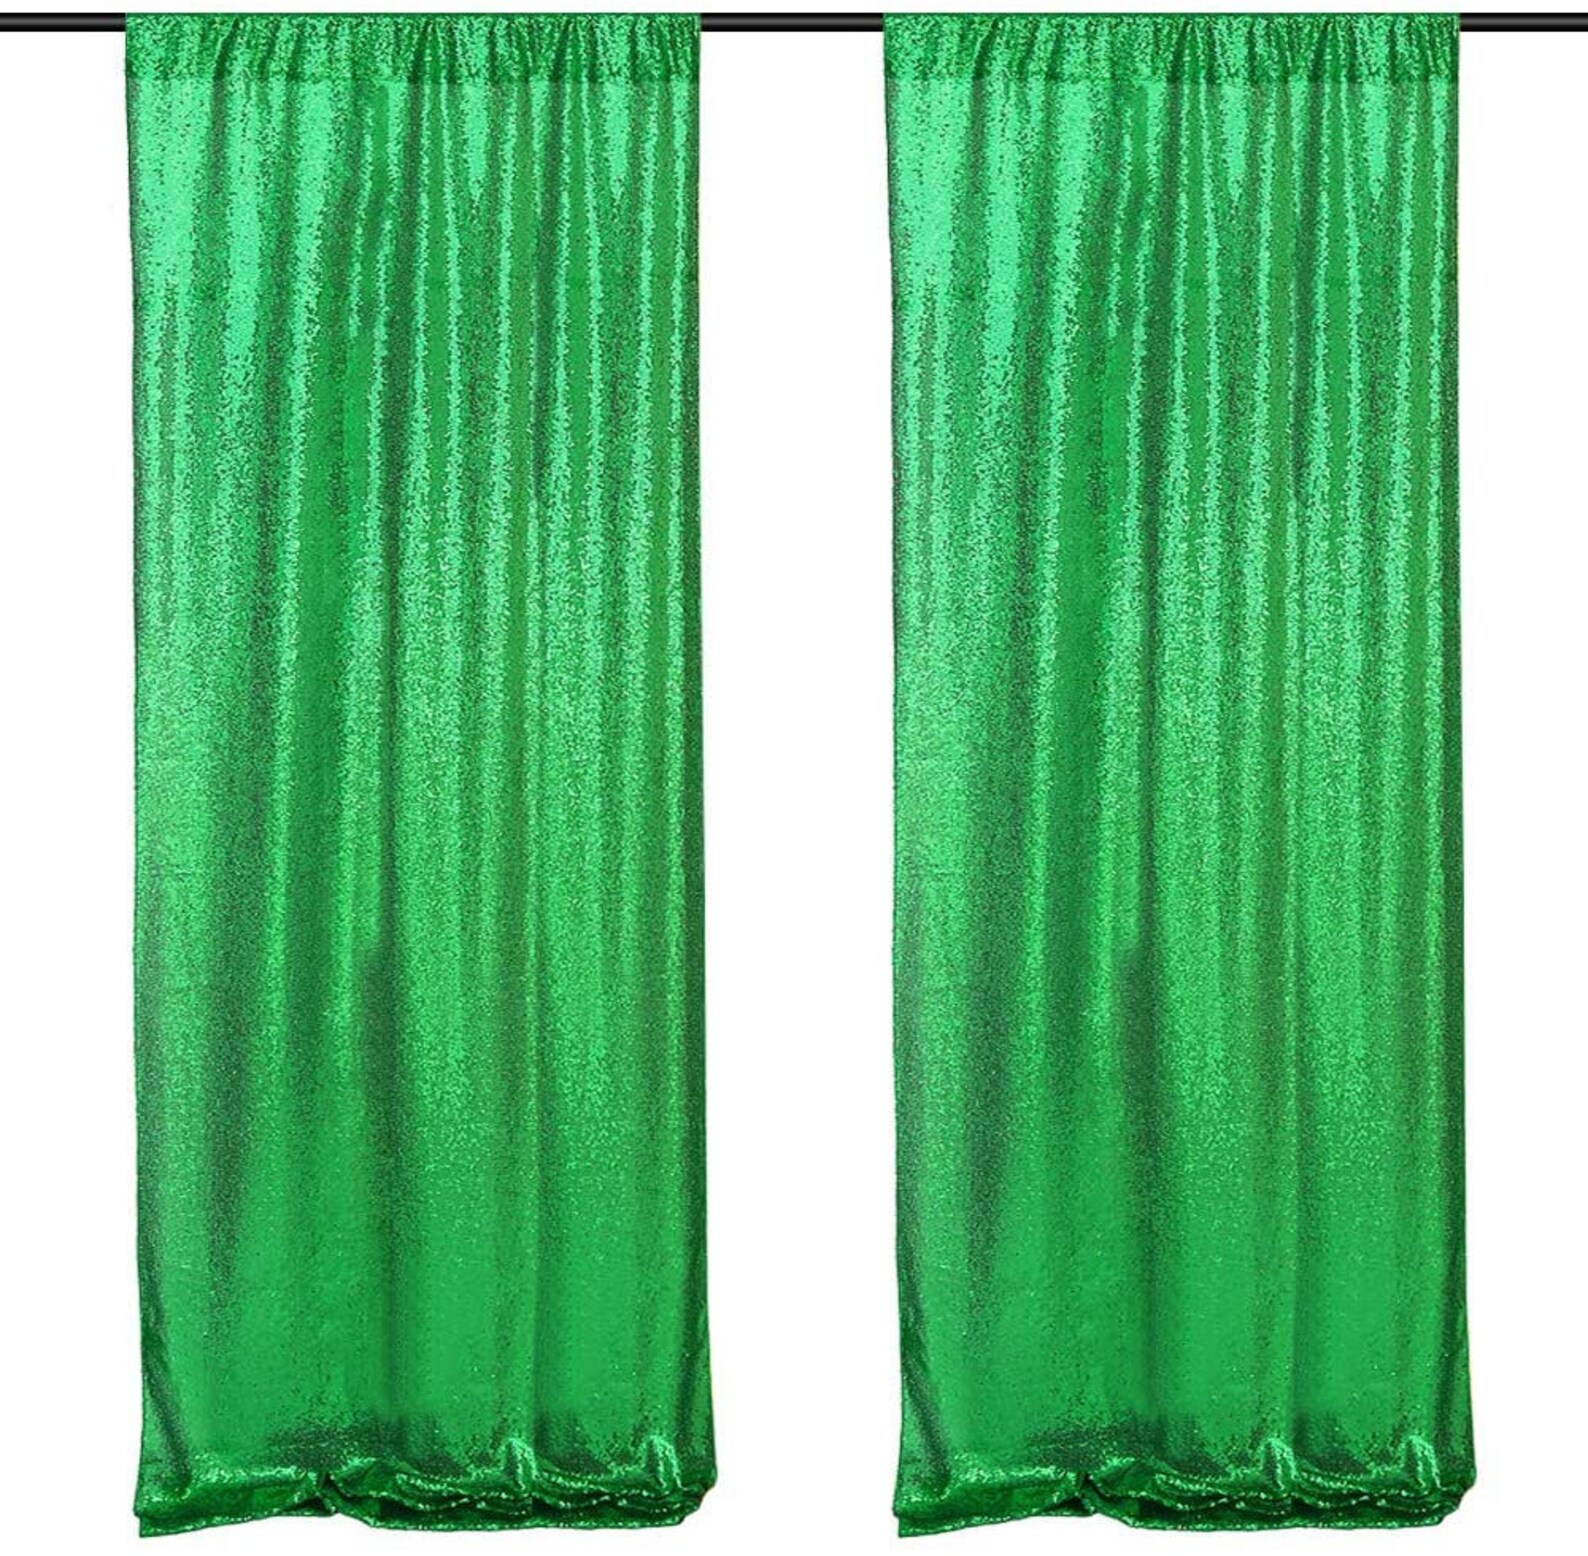 Green Sequin Backdrop Curtain Panels Stage 2 Pieces 2FTx8FT | Etsy